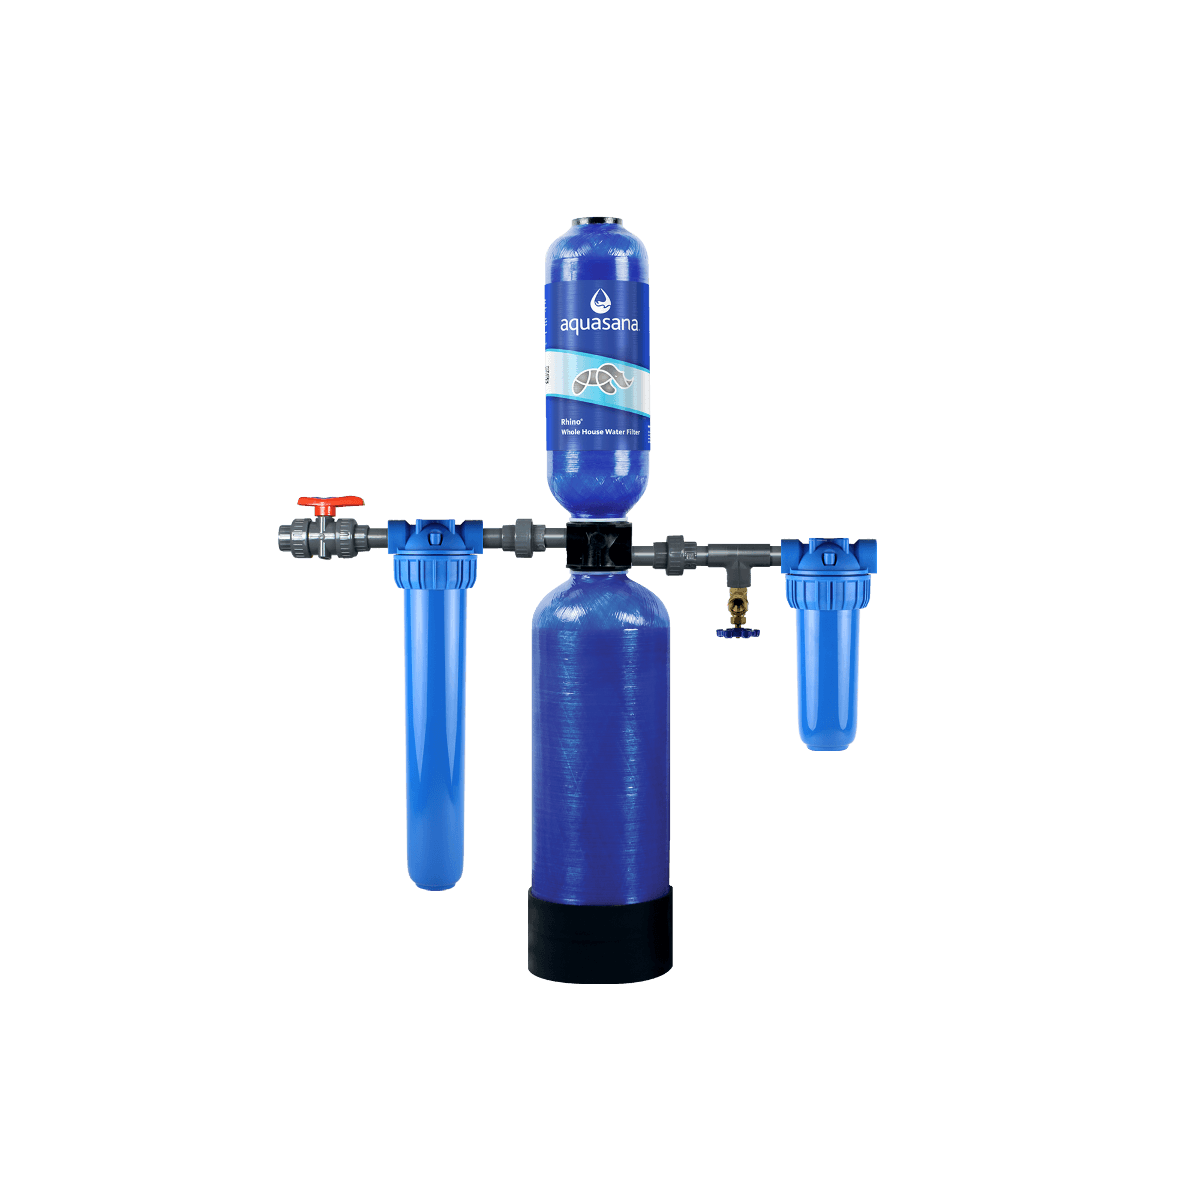 Rhino Whole House Water Filter System Home Water Filtration 10/1,000,000 Aquasana photo